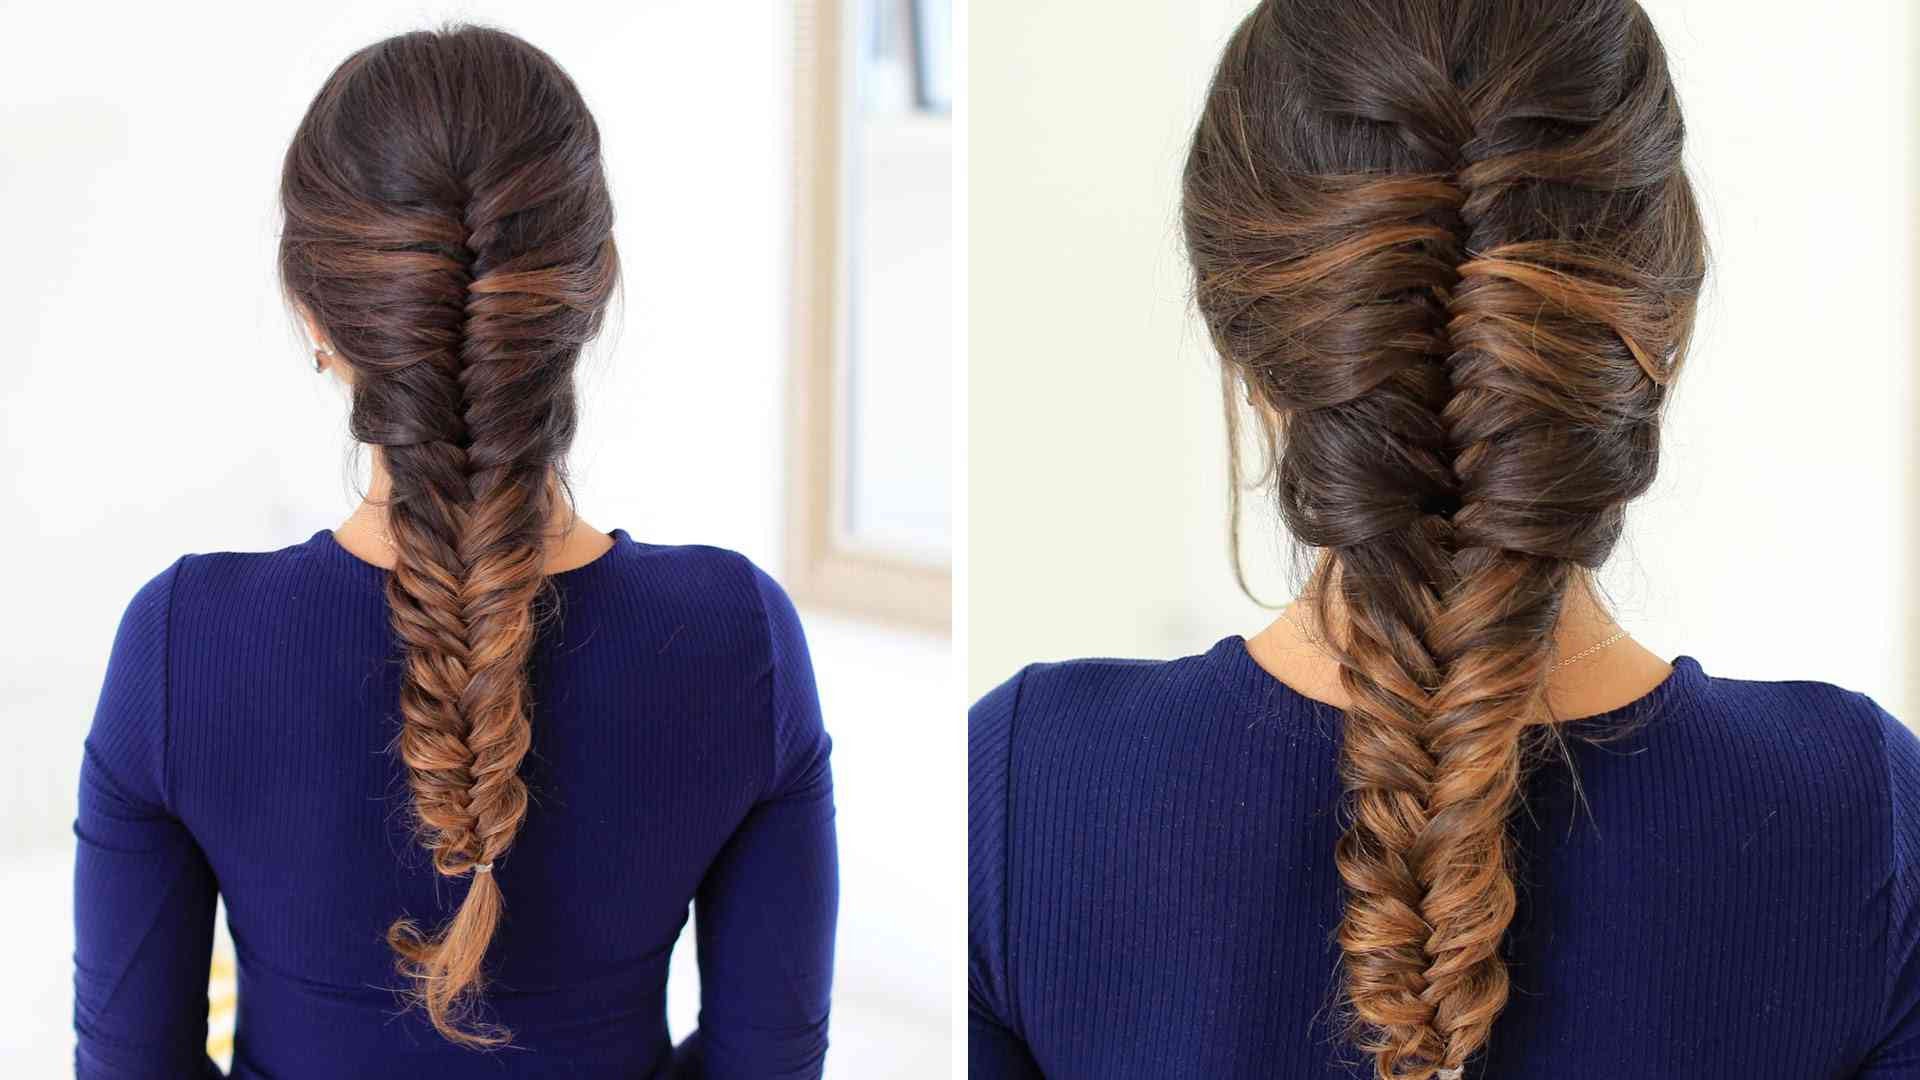 fishtail braid  Thick Messy Fishtail Braid Pictures Photos and Images  for Facebook   Long hair styles Fishtail braid hairstyles Hair styles